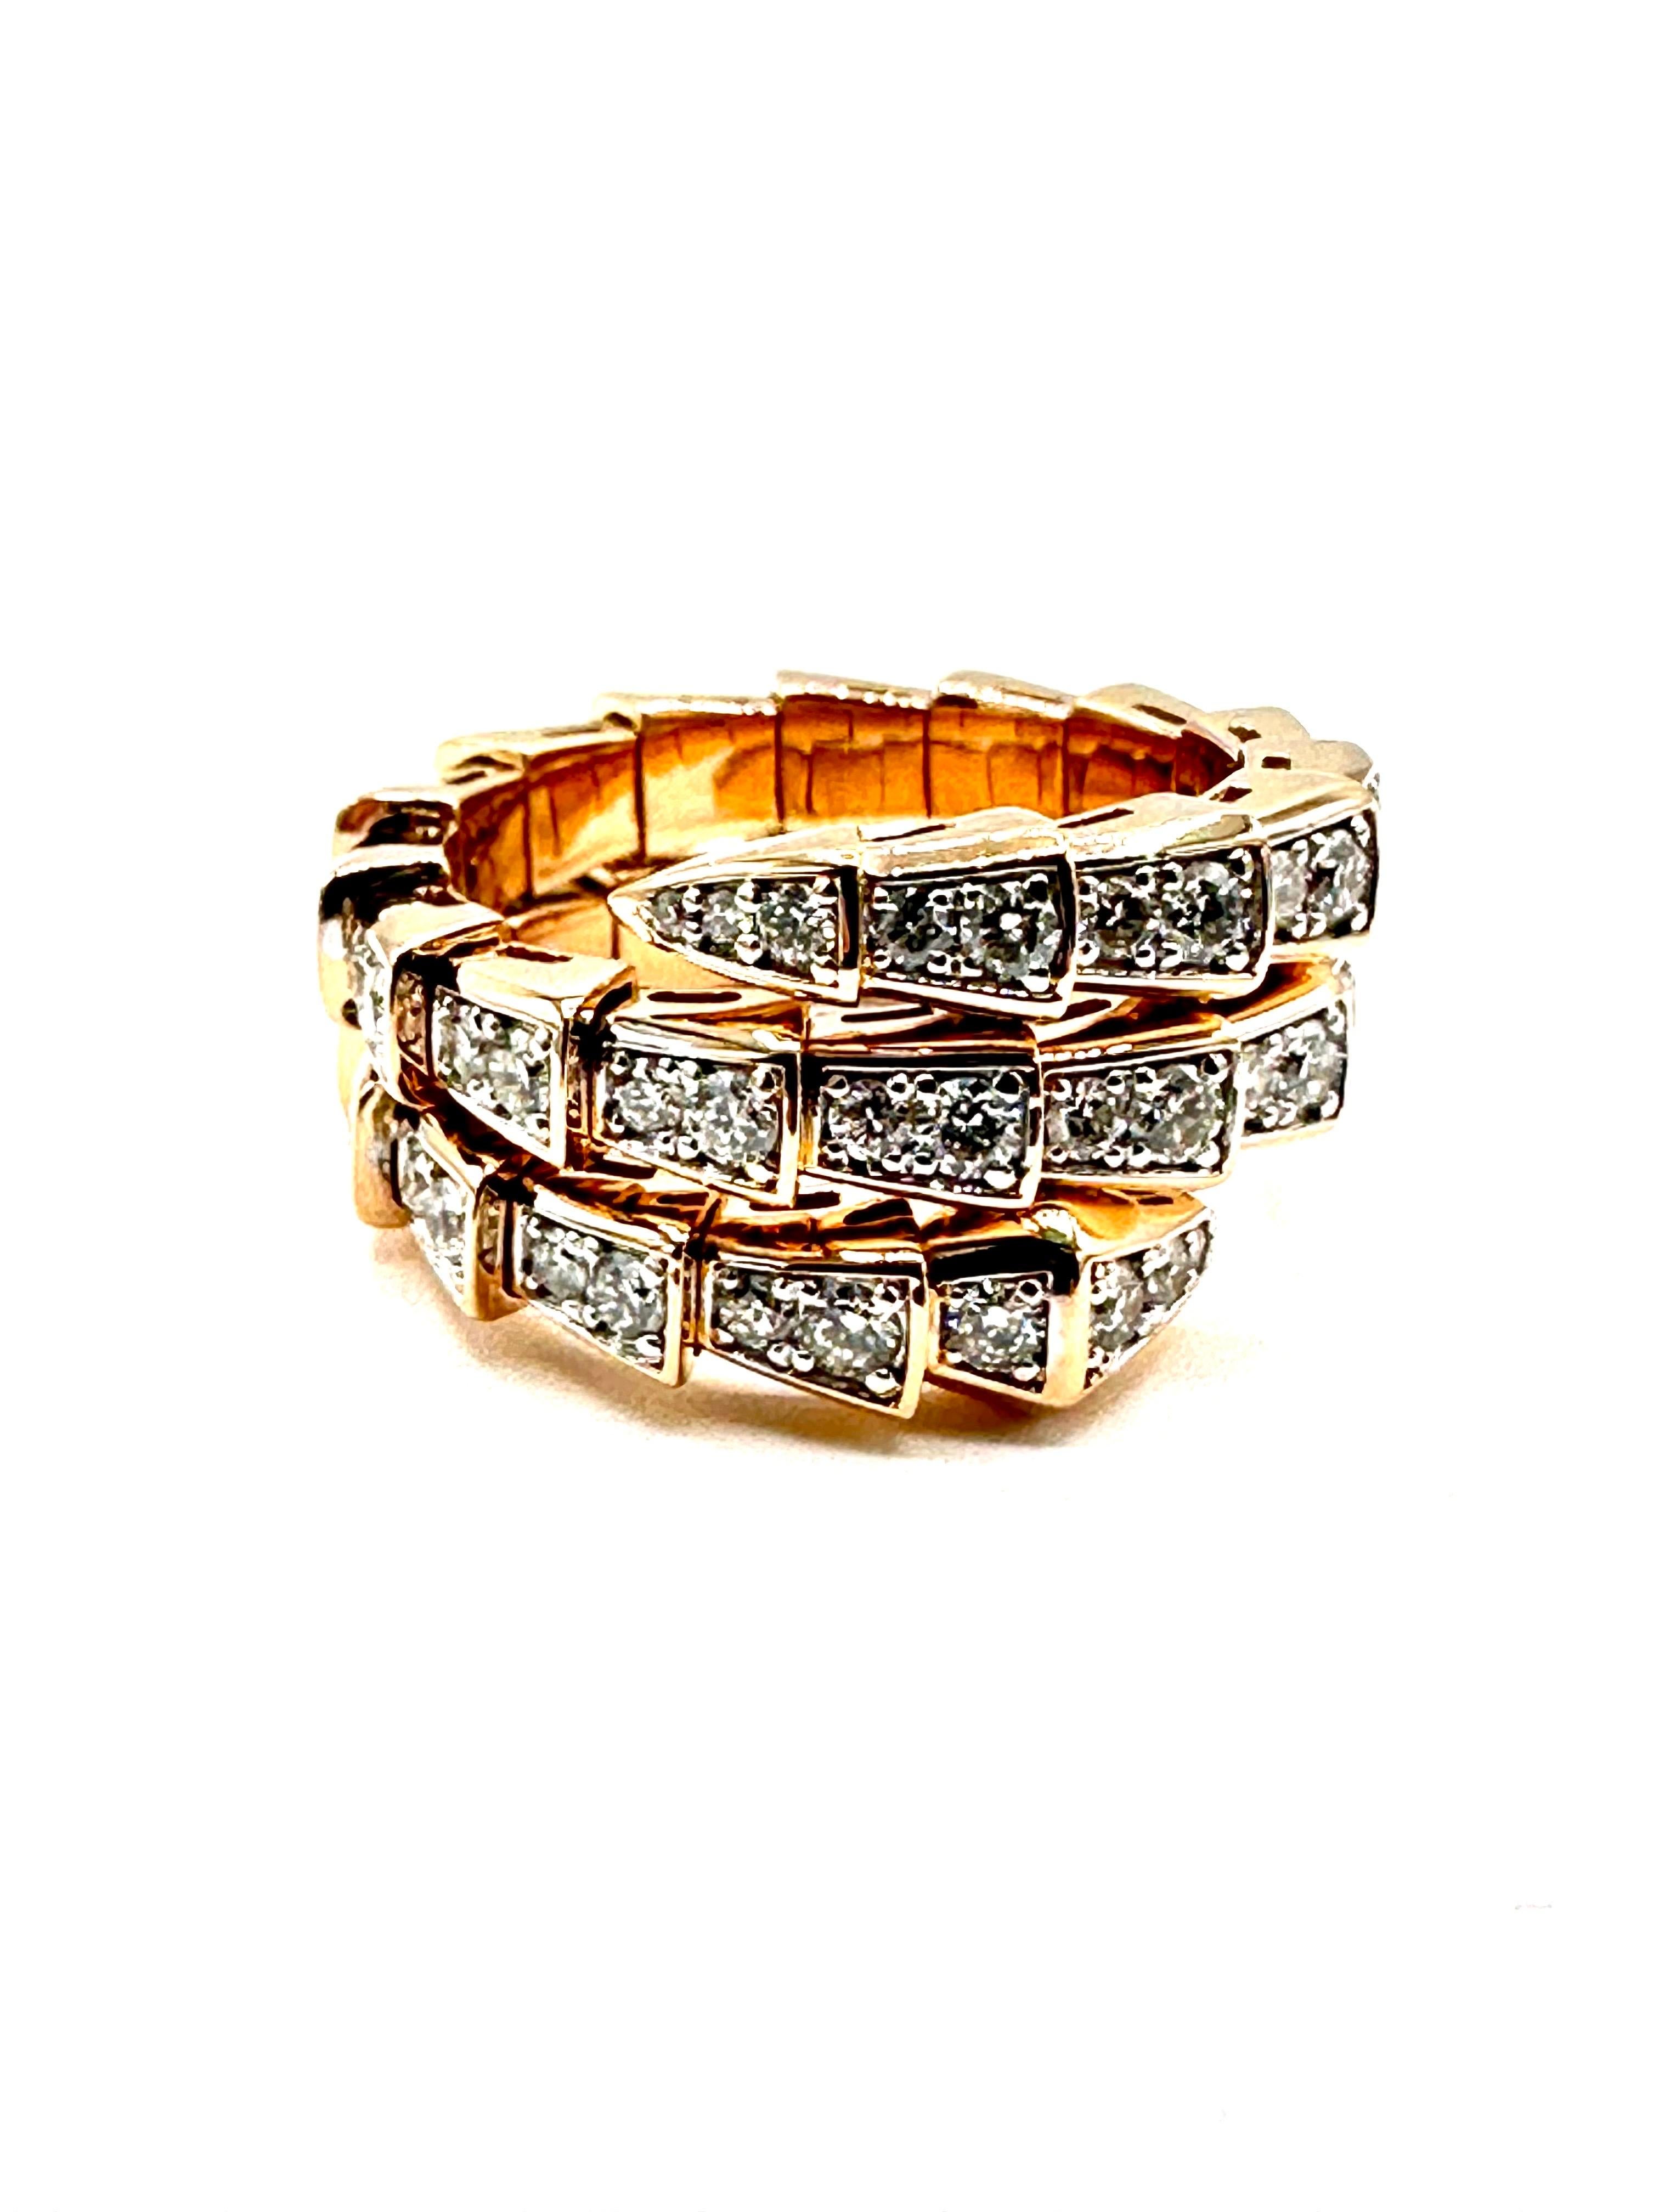 1.64 Carat Bulgari Serpenti Viper Two Coil Ring in 18K Rose Gold In Excellent Condition For Sale In Chevy Chase, MD